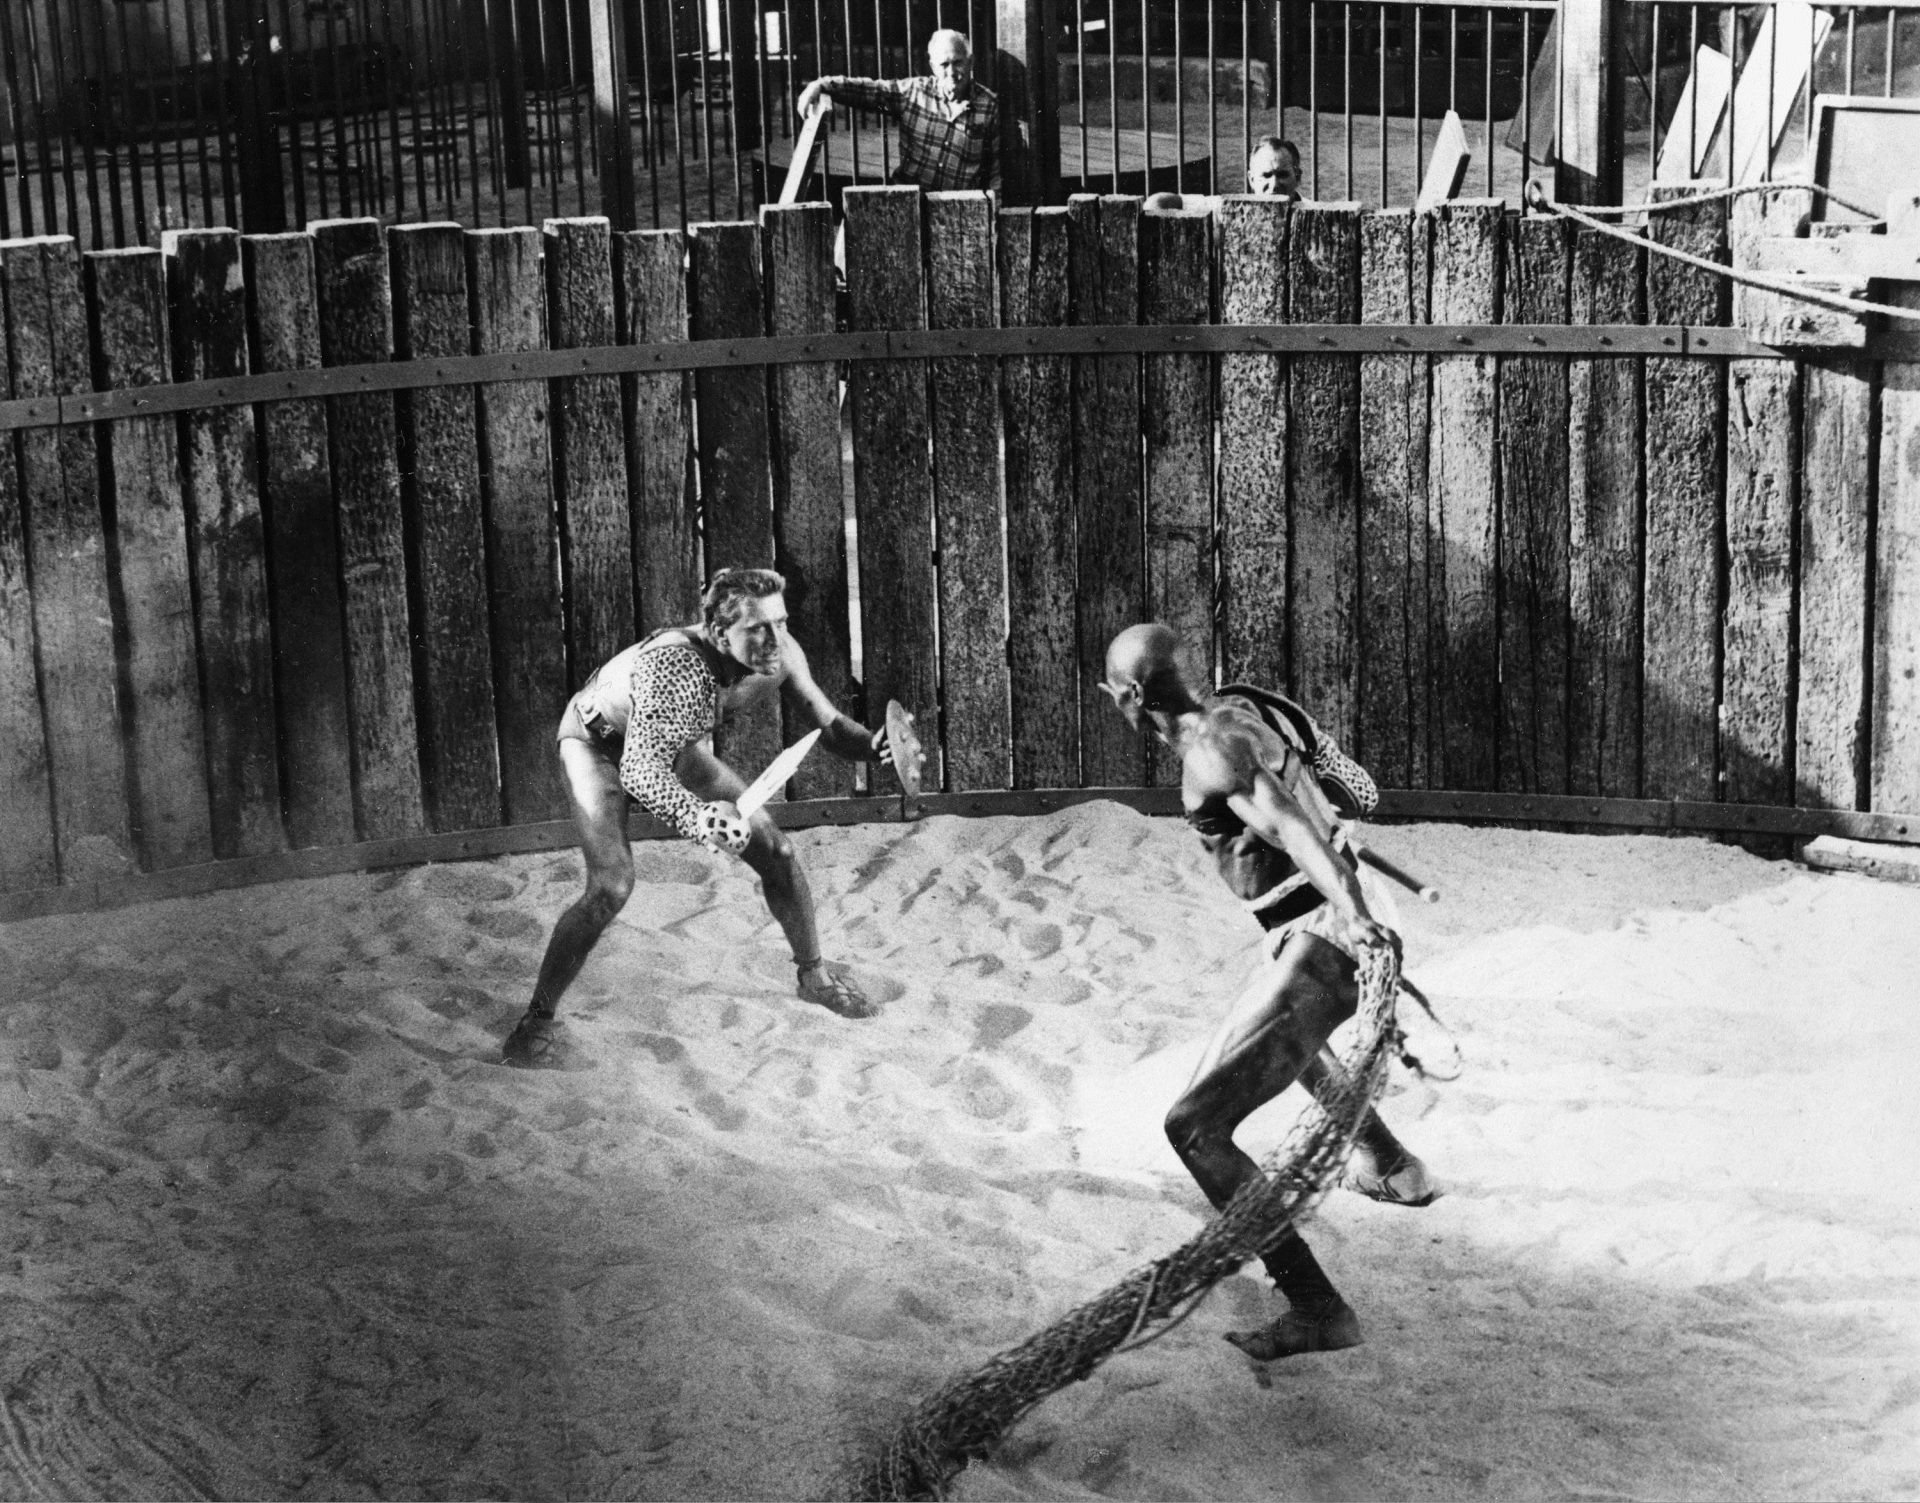 FILE - In this April 1959 file photo, actor Kirk Douglas, left, in the title role as a Roman slave and gladiator, Spartacus, battles Woody Strode in the role of gladiator Draba in a scene from "Spartacus" filmed in Hollywood, Ca. A new South African production of the ballet, "A Spartacus in Africa," will incorporate African dance styles with classical and contemporary dance for a story that its producers say resonates on a continent with its own history of oppression.